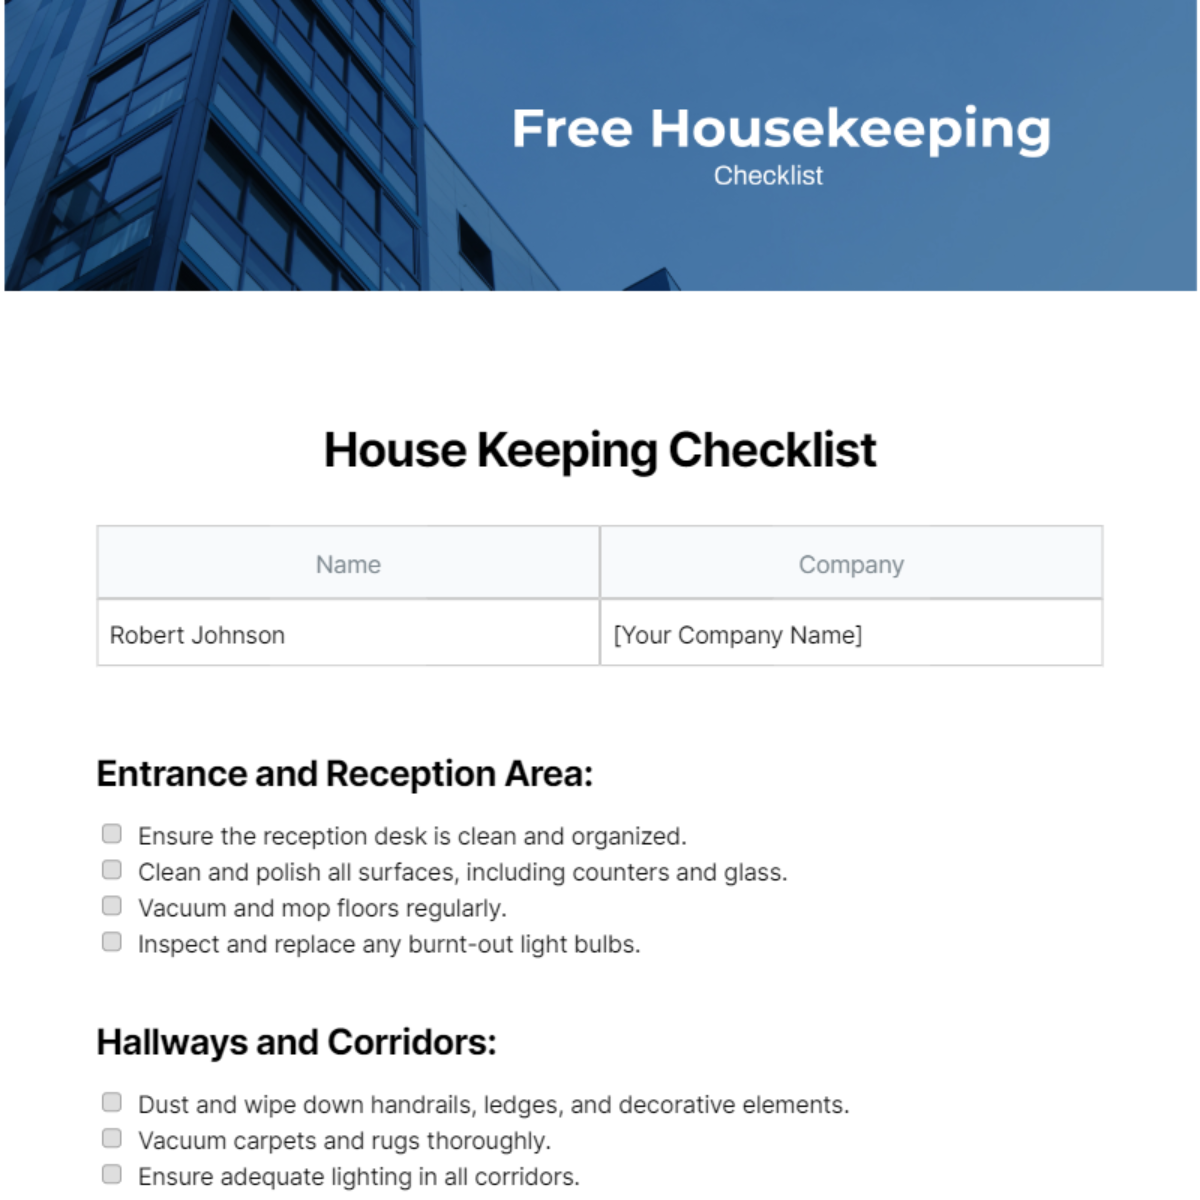 Free Housekeeping Checklist Template 